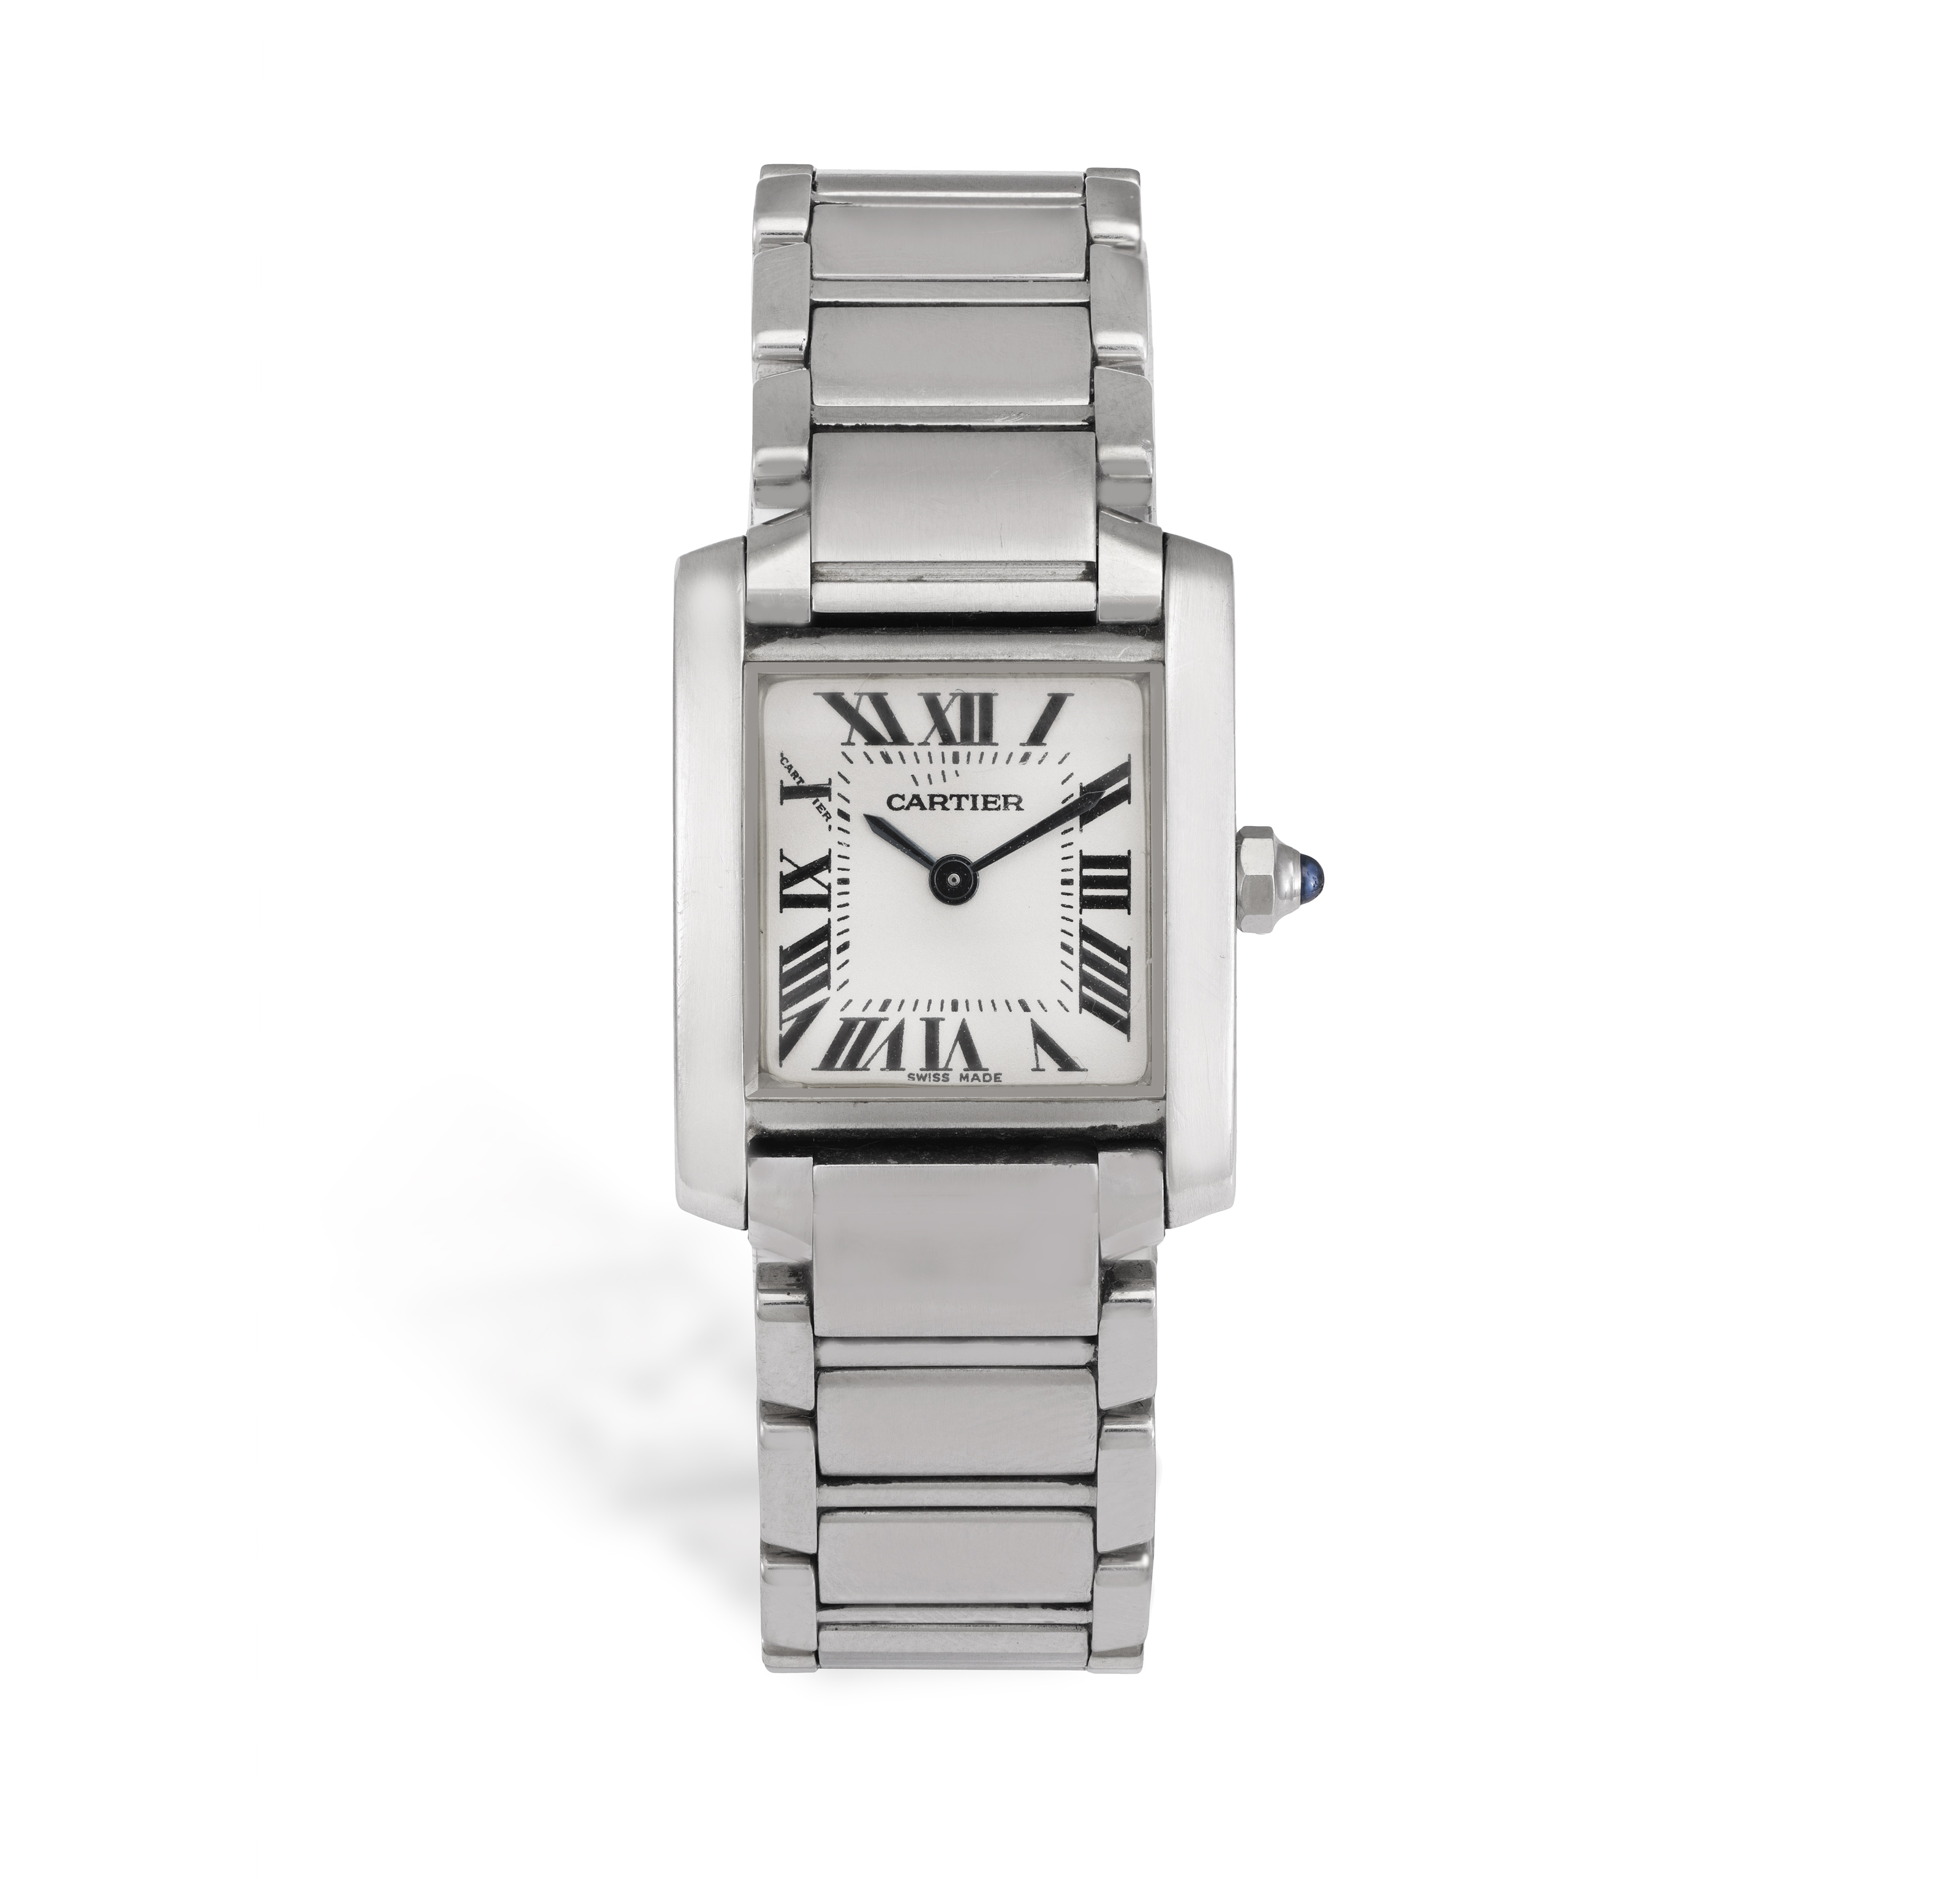 A LADY'S STAINLESS STEEL 'TANK FRANCAISE' QUARTZ BRACELET WATCH, BY CARTIER 4-jewel Cal. 057 - Image 2 of 7